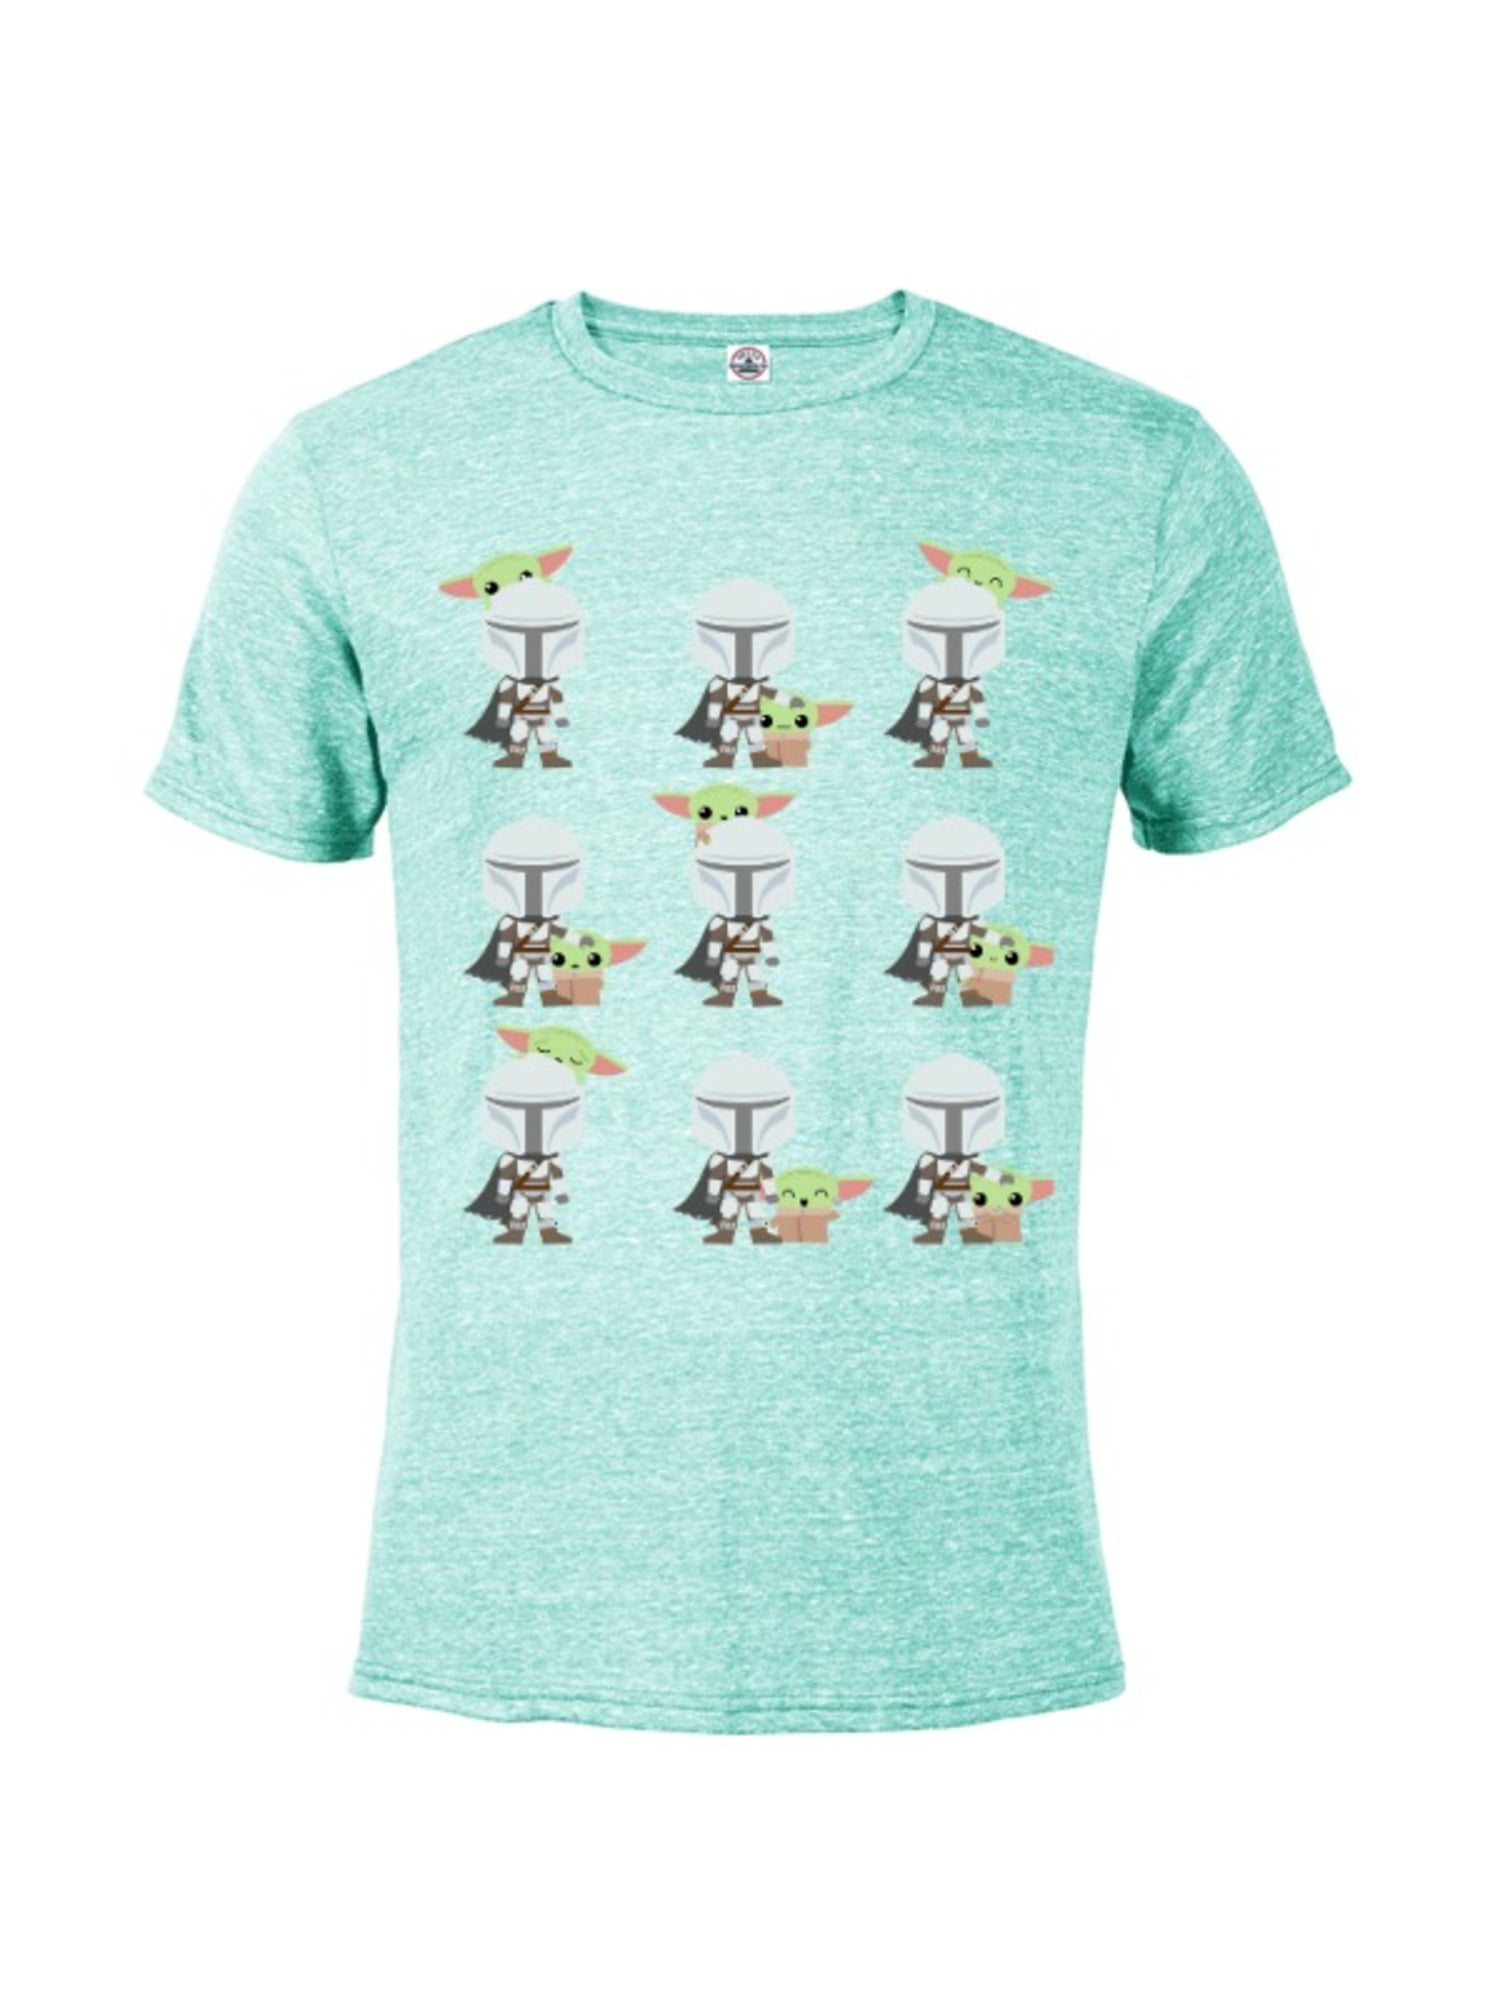 Star Wars The Mandalorian Expressions of the Child T-Shirt